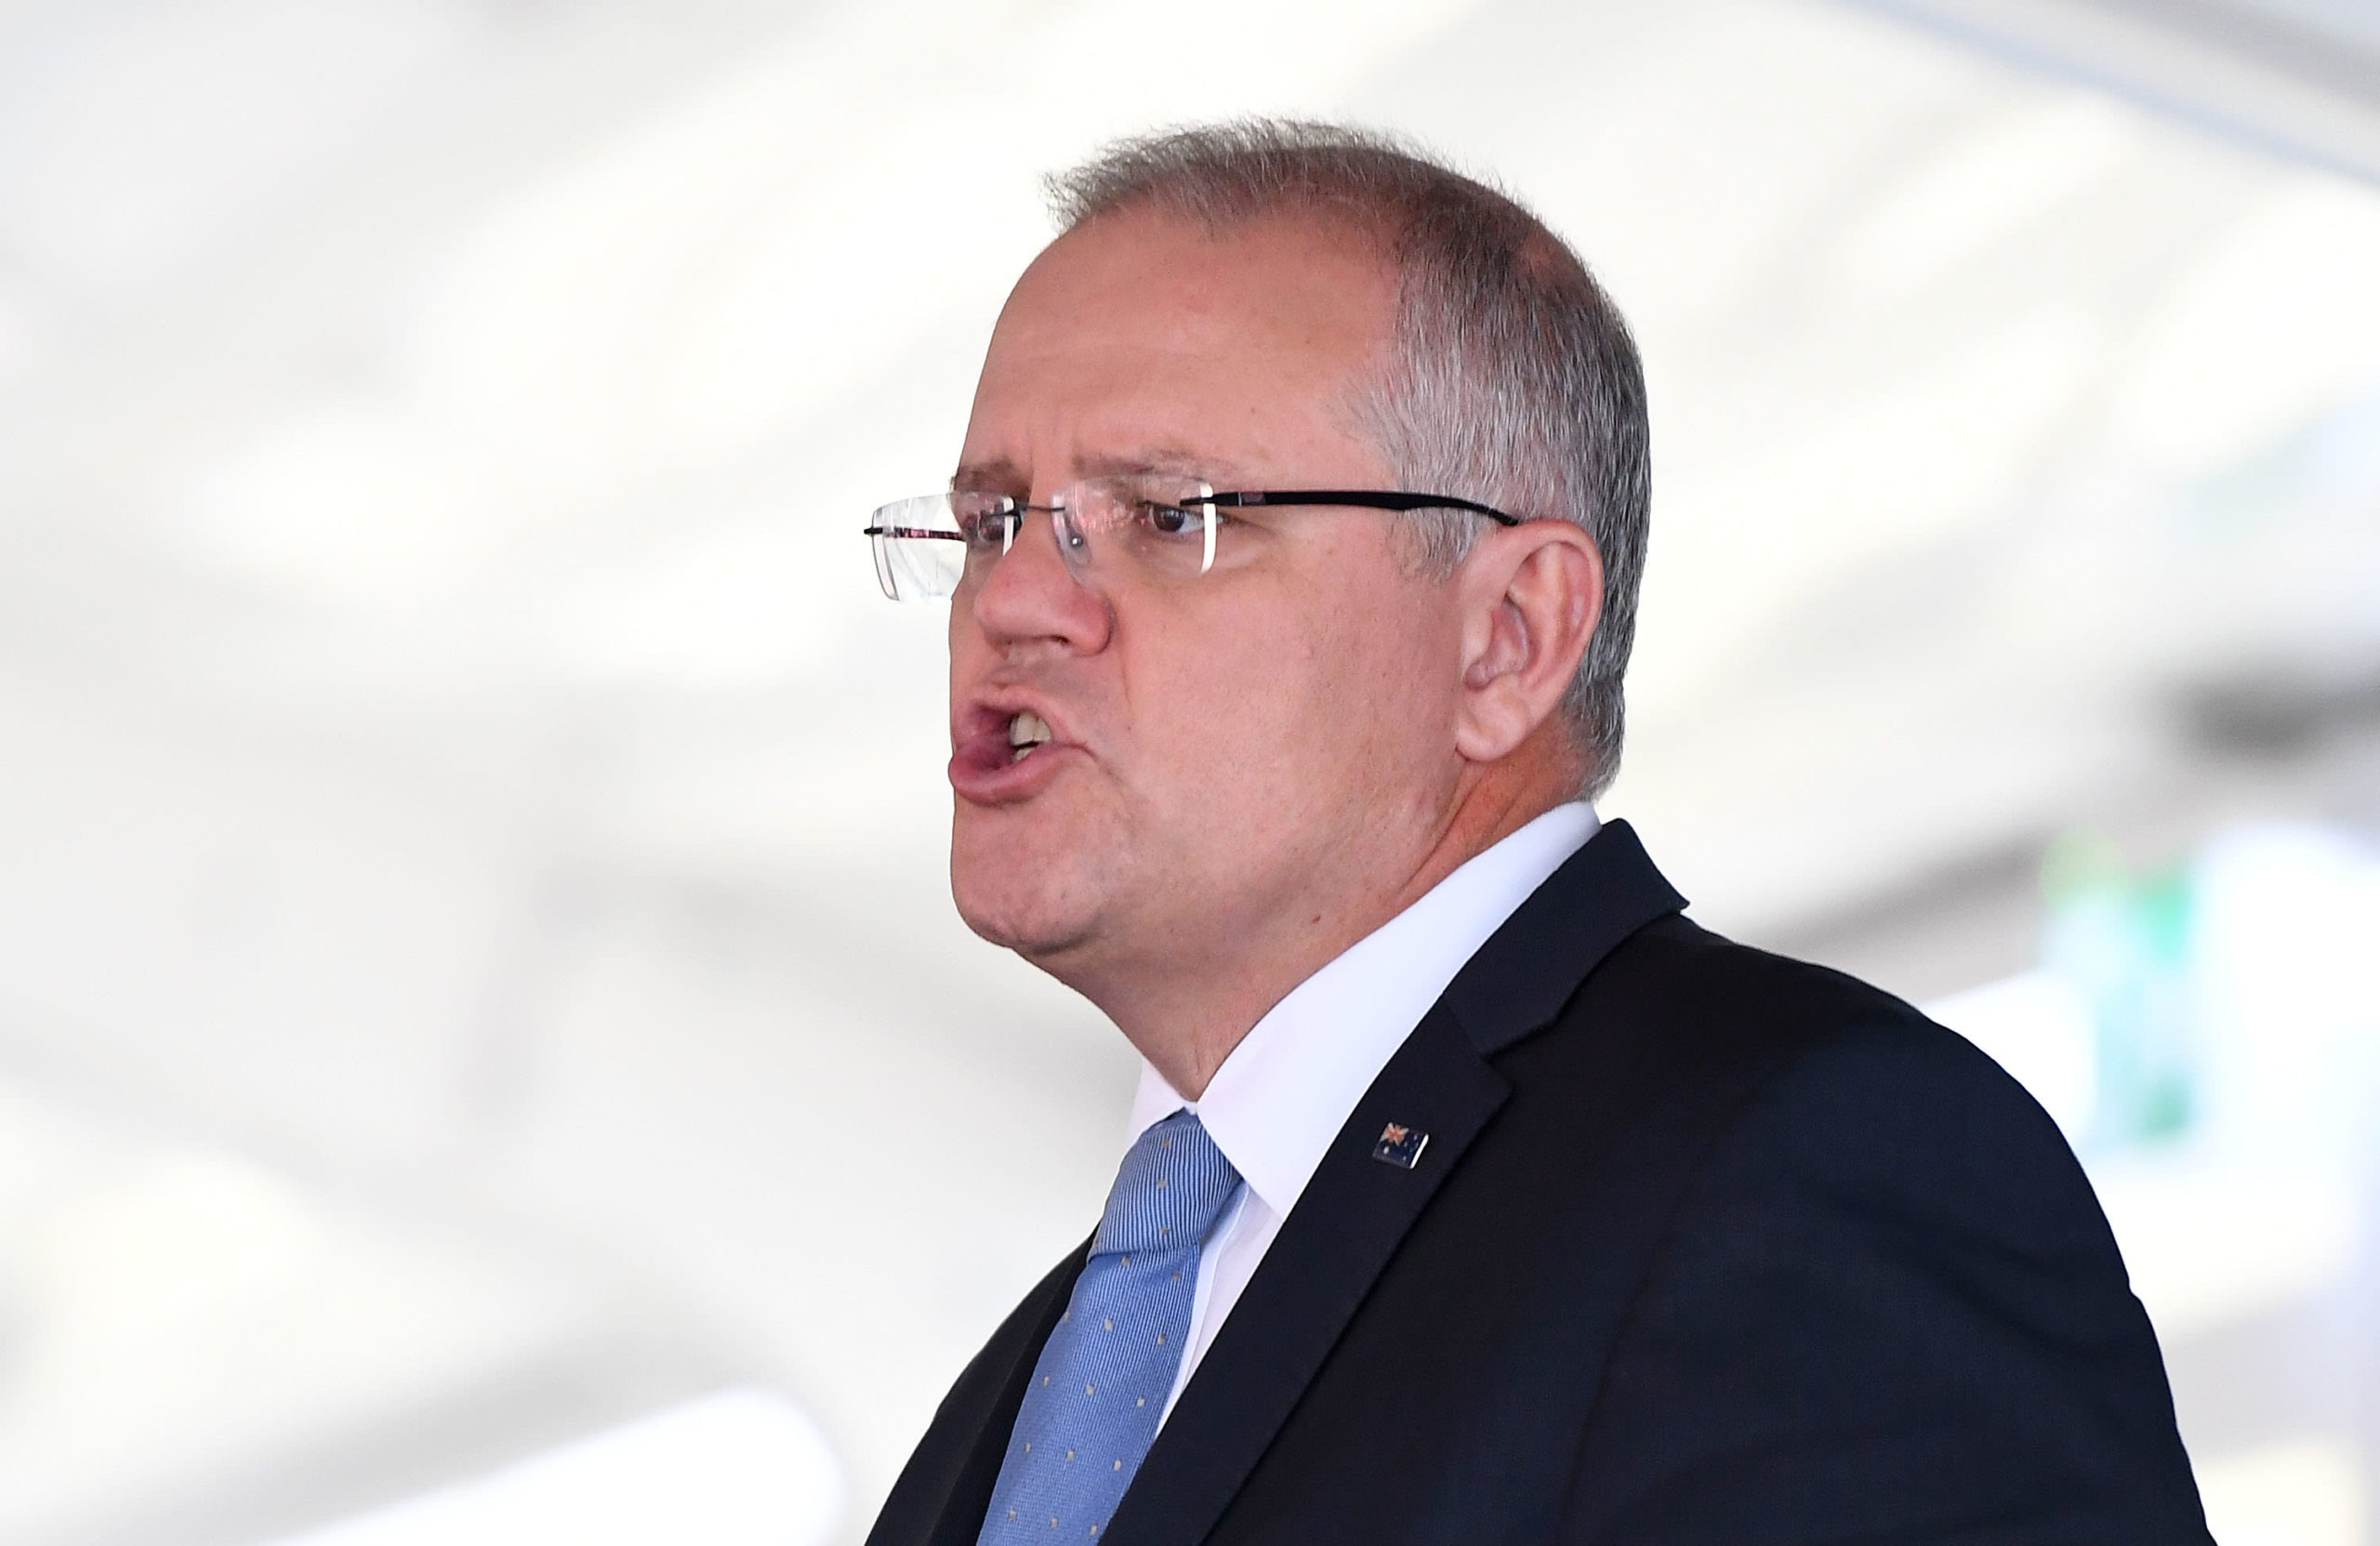 Vaccine needs to be as obligatory as attainable, Australian PM says